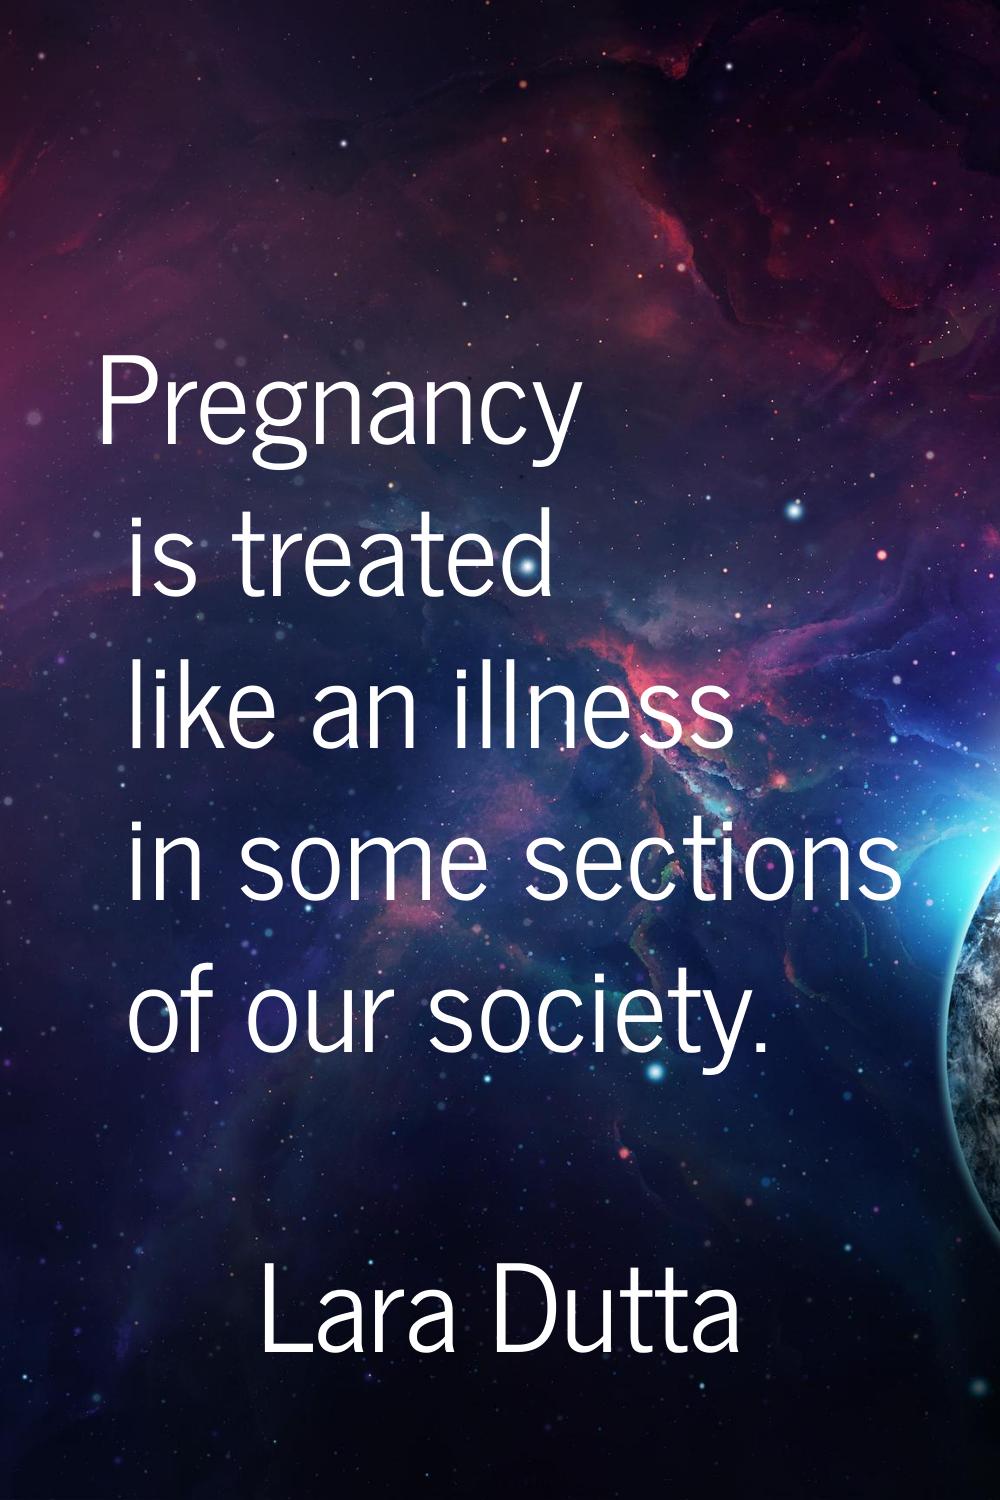 Pregnancy is treated like an illness in some sections of our society.